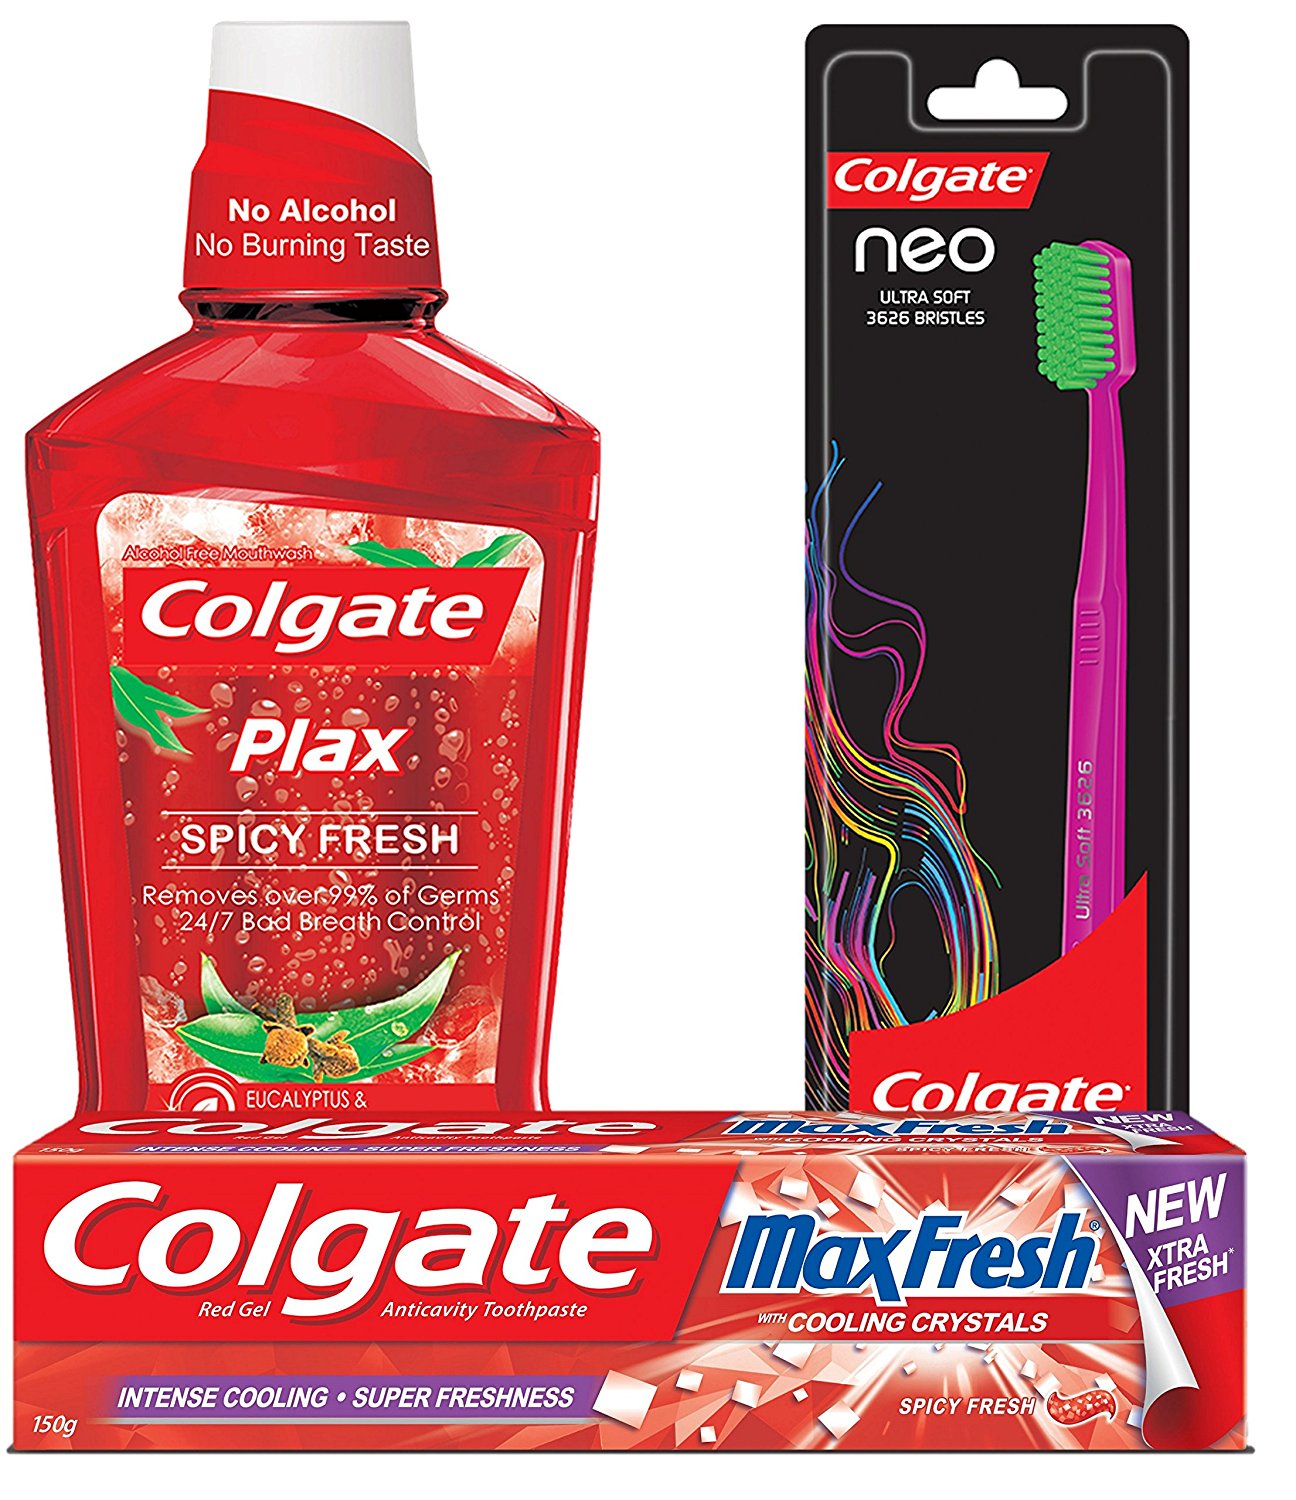 Colgate Freshness Combo (Colgate Max Fresh Red Toothpaste - 150 g, Colgate Ultra Soft Neo Toothbrush, Colgate Plax Spicy Fresh Alcohol Free Mouthwash - 250 ml)